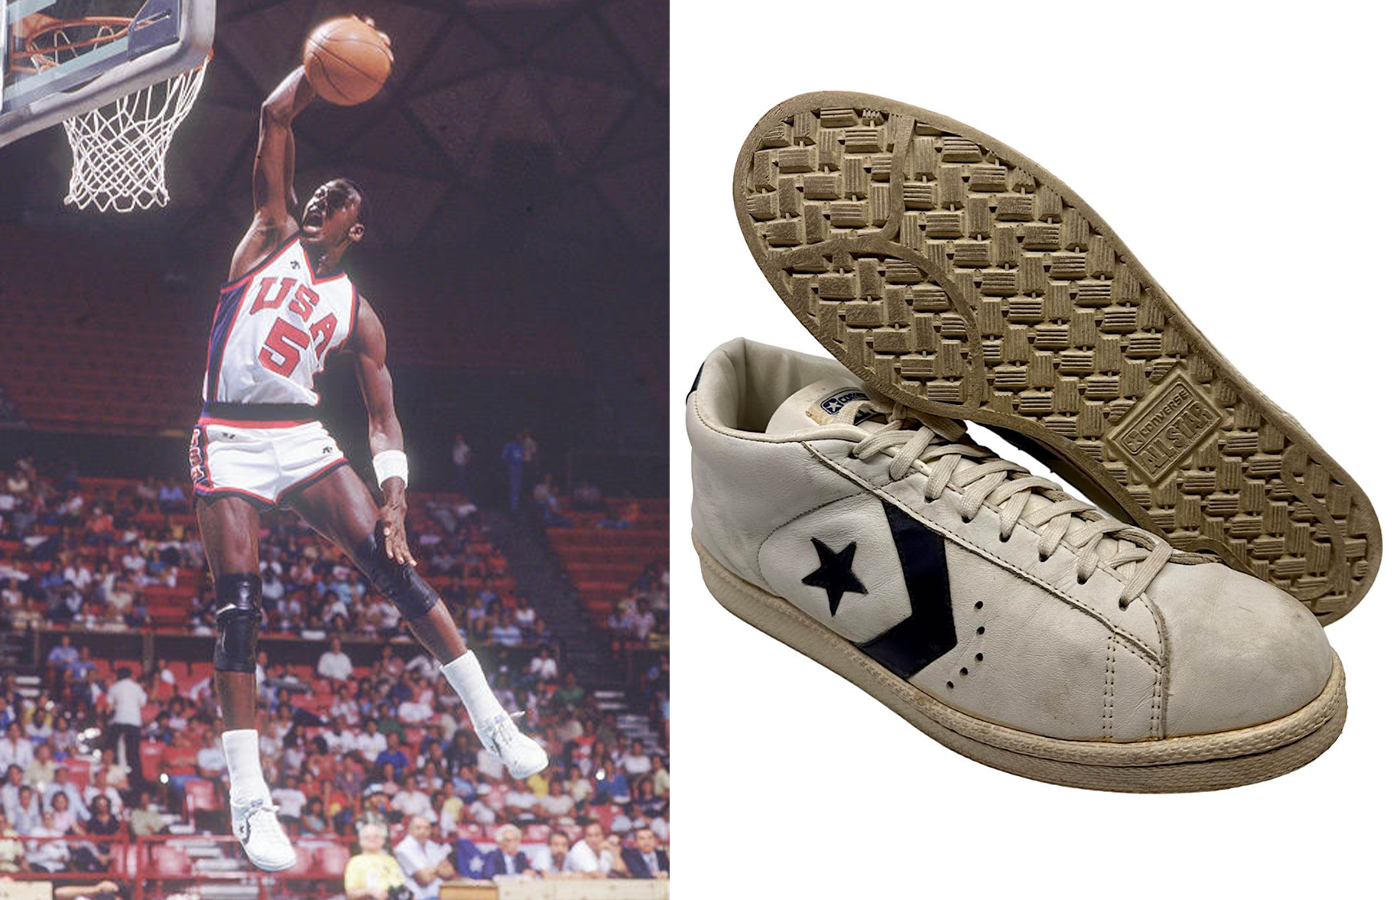 Michael Jordan's 1984 Olympic Trials Sneakers Are Up For Auction